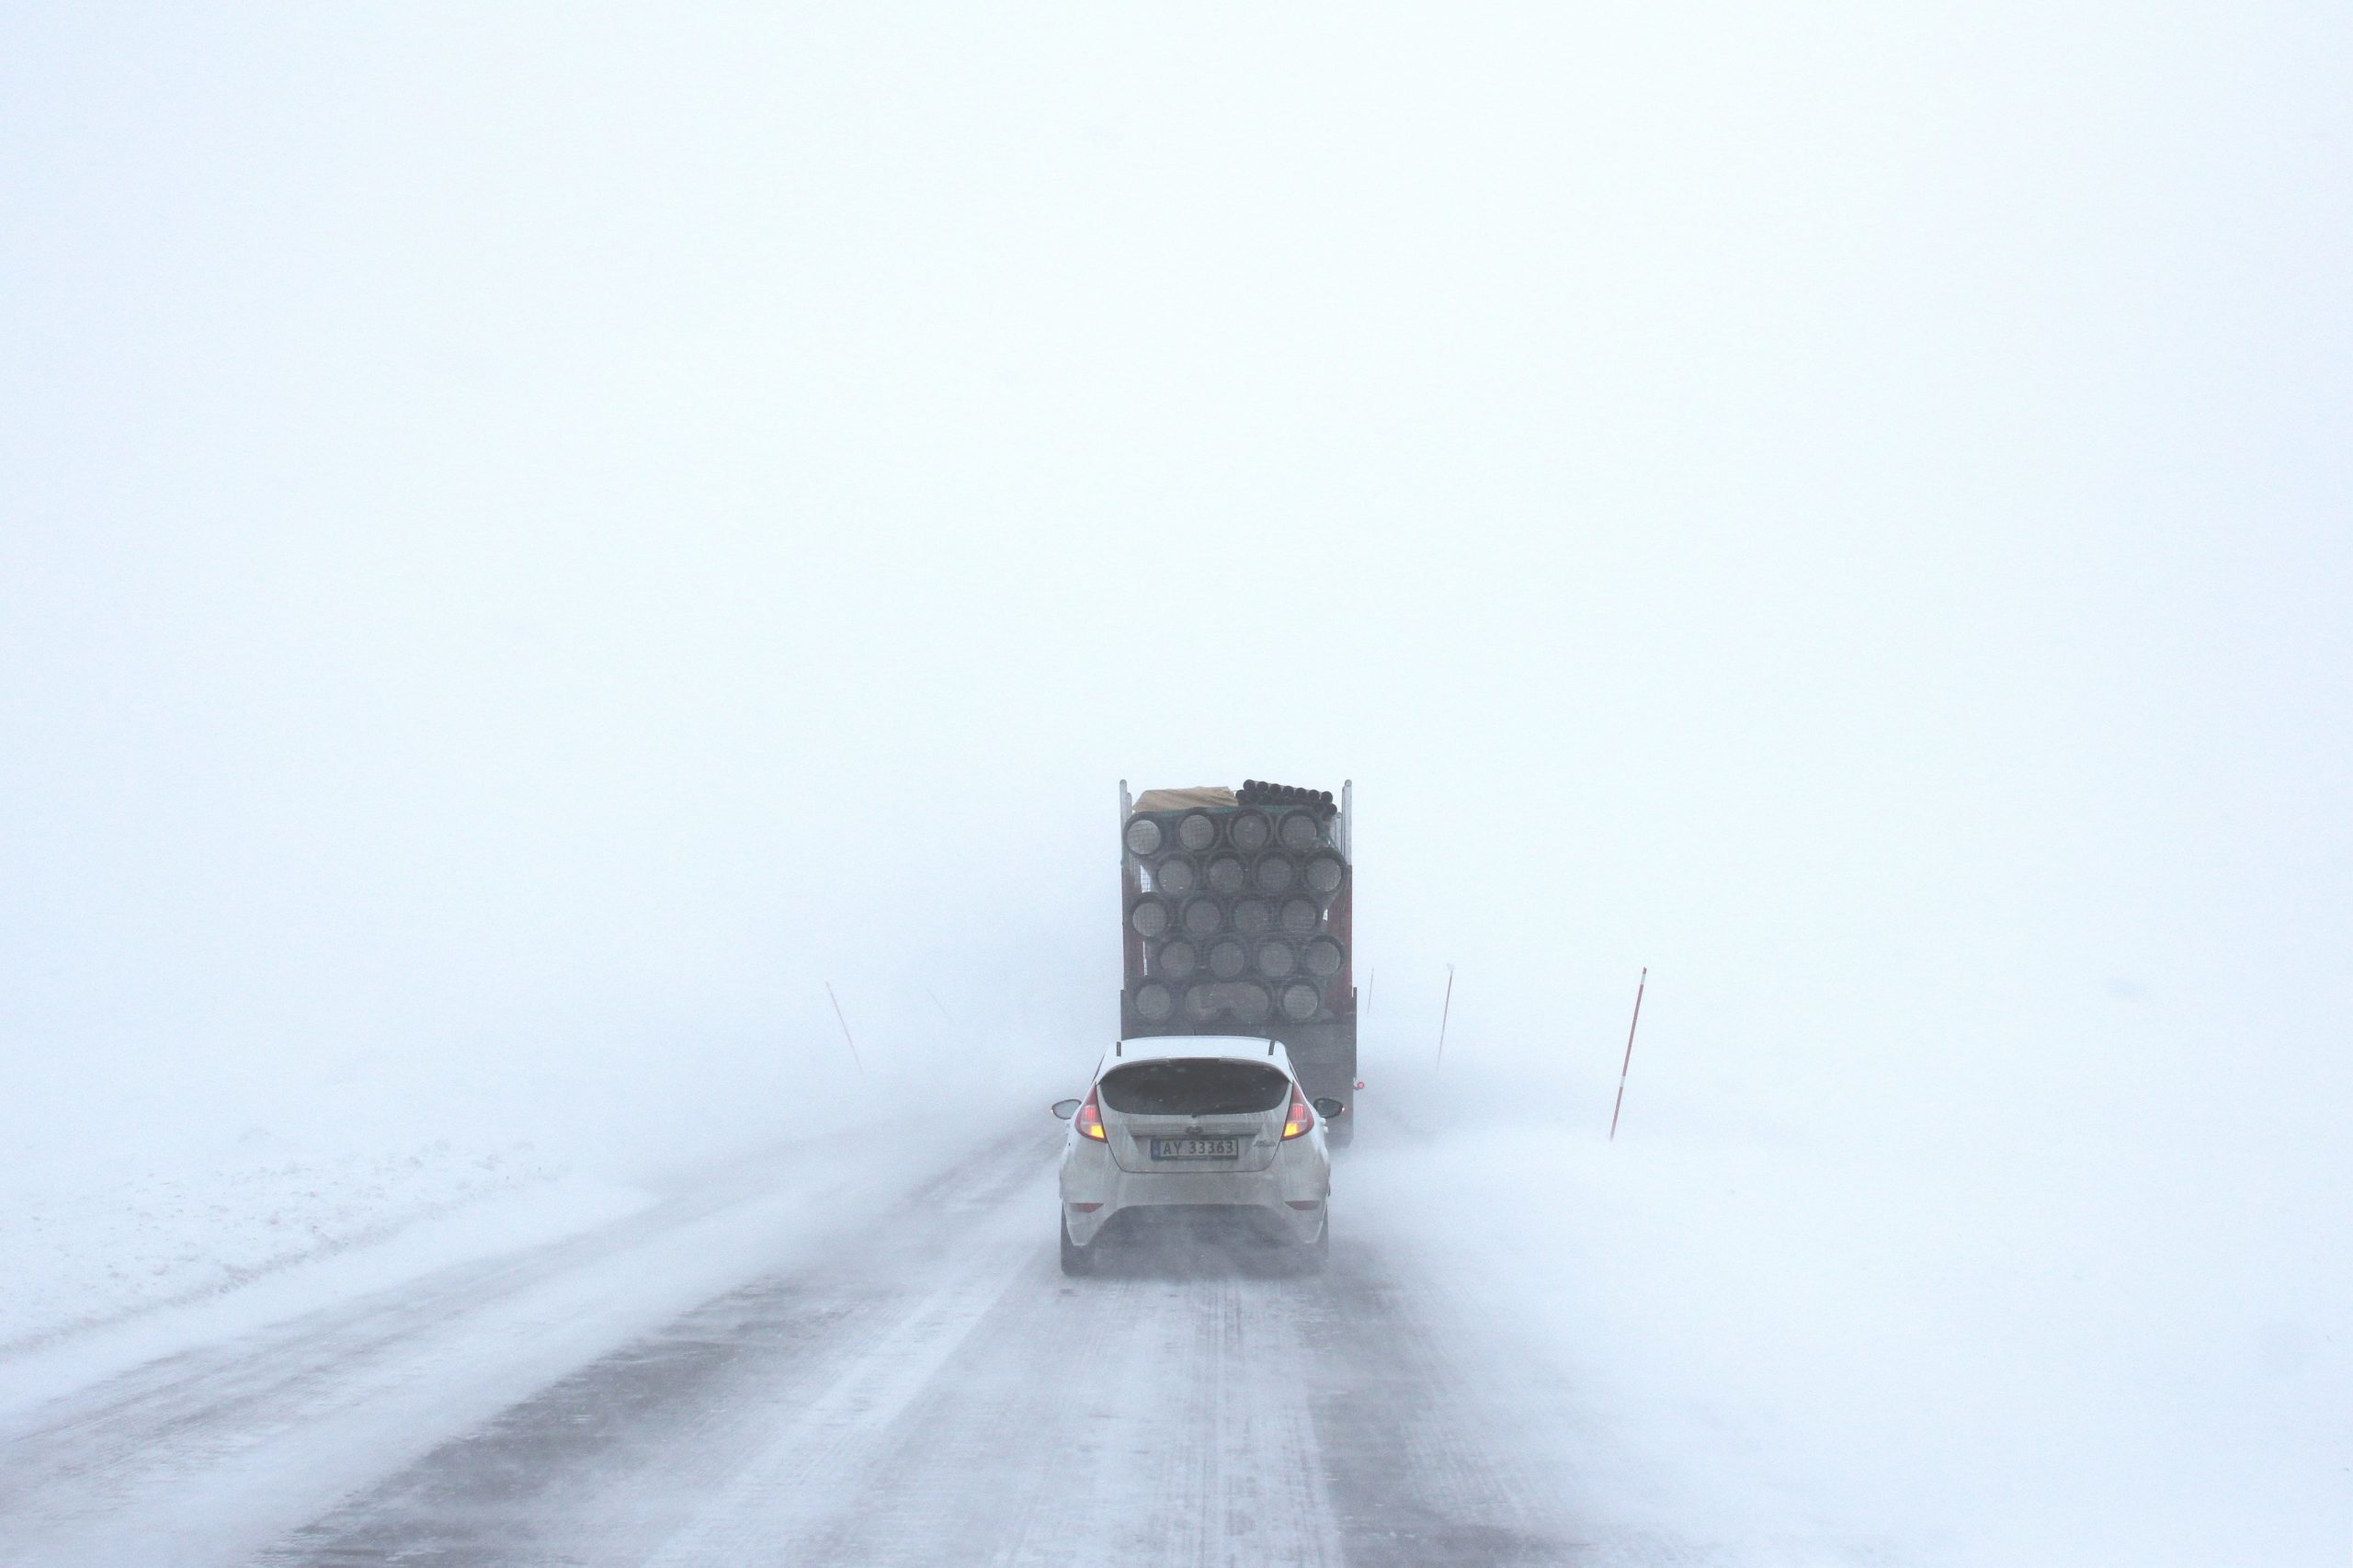 Car travels on the road behind a truck on a snowy day with minimal visibility